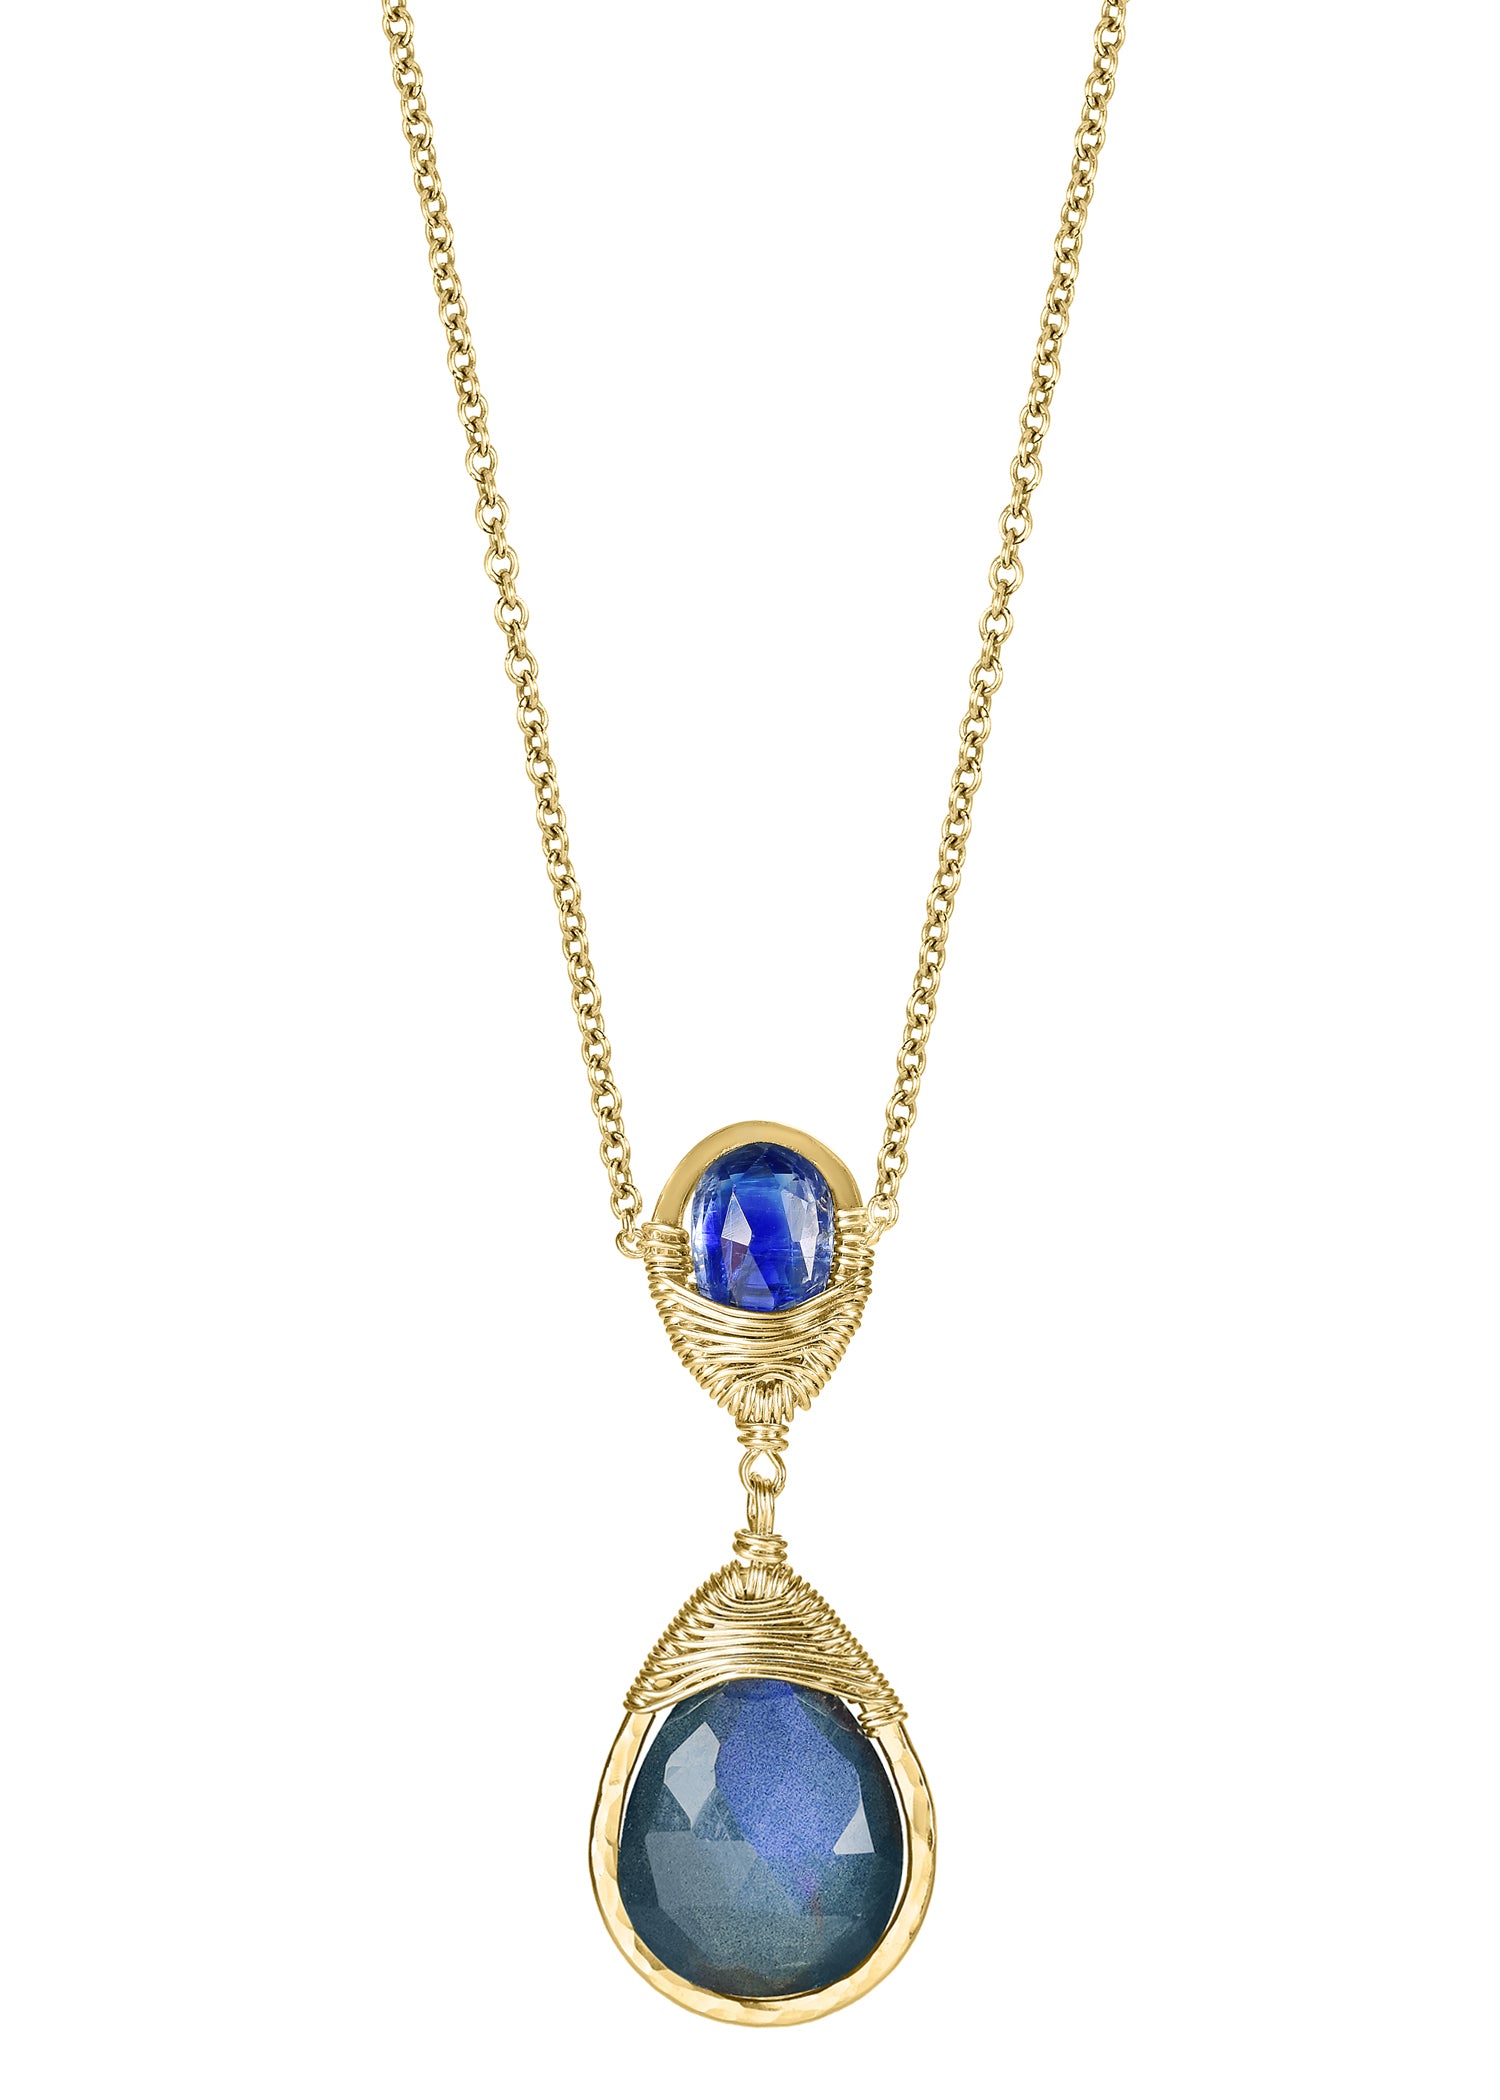 Kyanite Labradorite 14k gold fill Necklace measures 17" in length Pendant measures 1-1/4" in length and 7/16" in width at the widest point Handmade in our Los Angeles studio